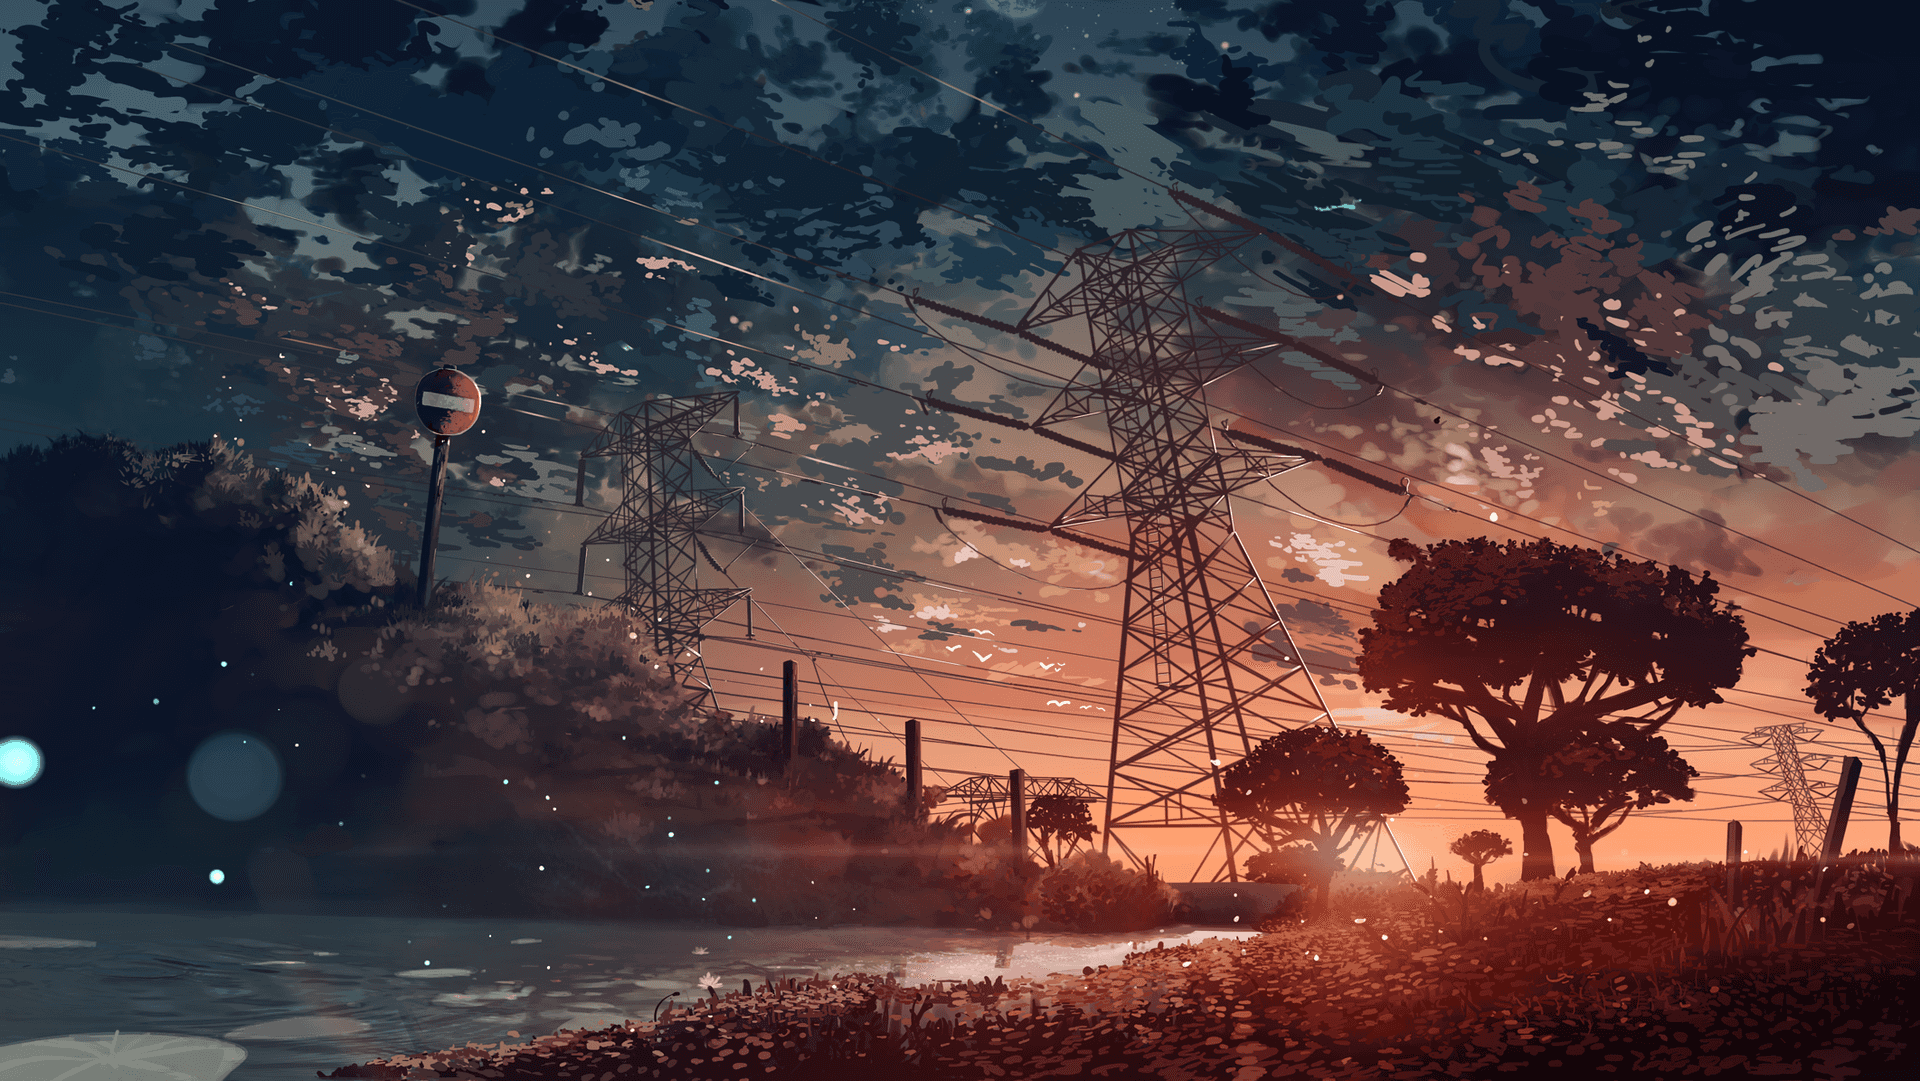 Whimsical Landscape From 5 Centimeters Per Second